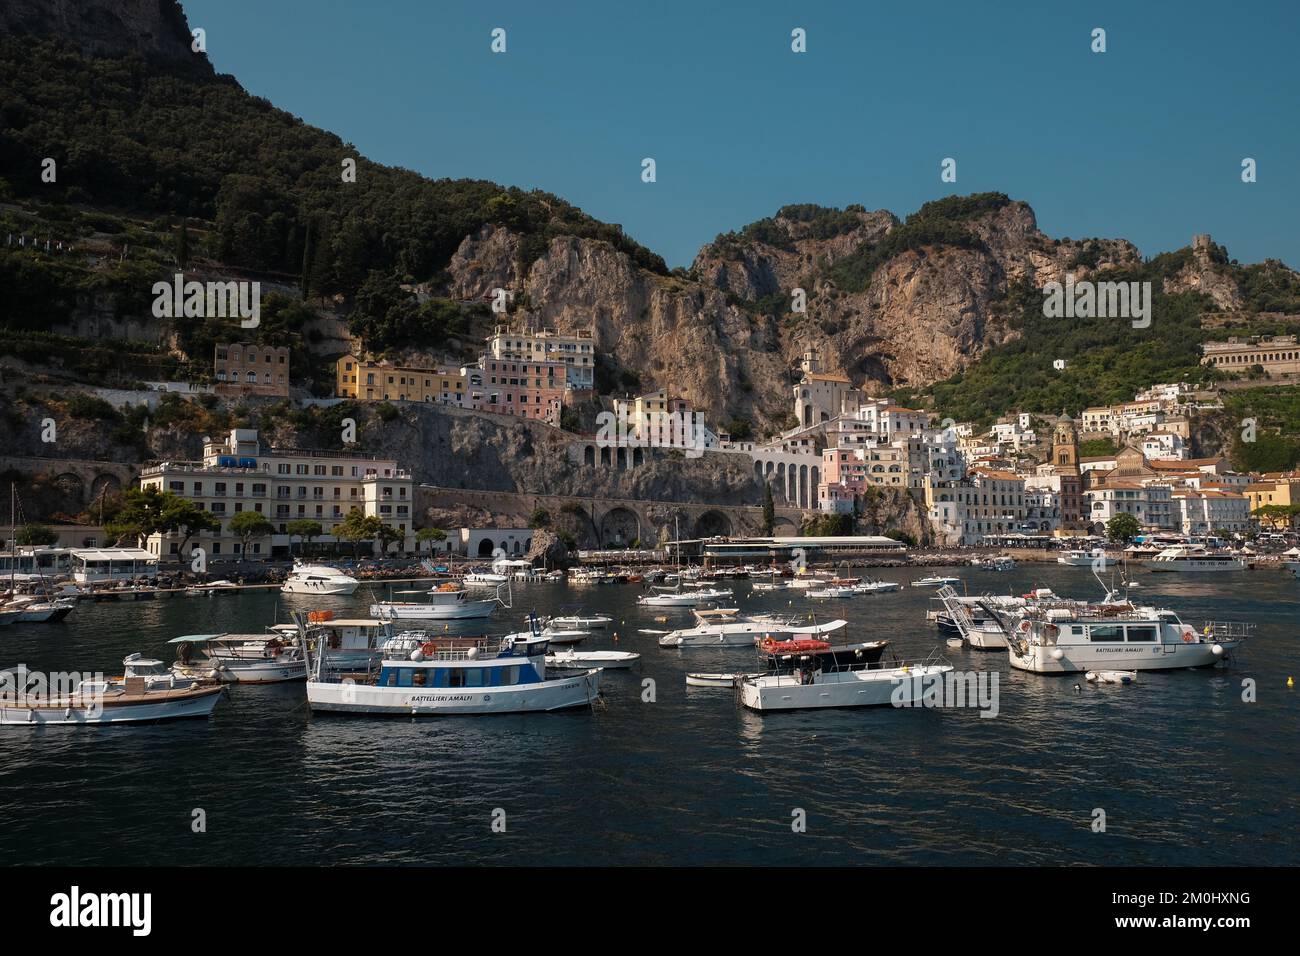 A general view of Amalfi town from the marina wall across to the port and main town with boats in the foreground and limestone cliffs in the background. Stock Photo